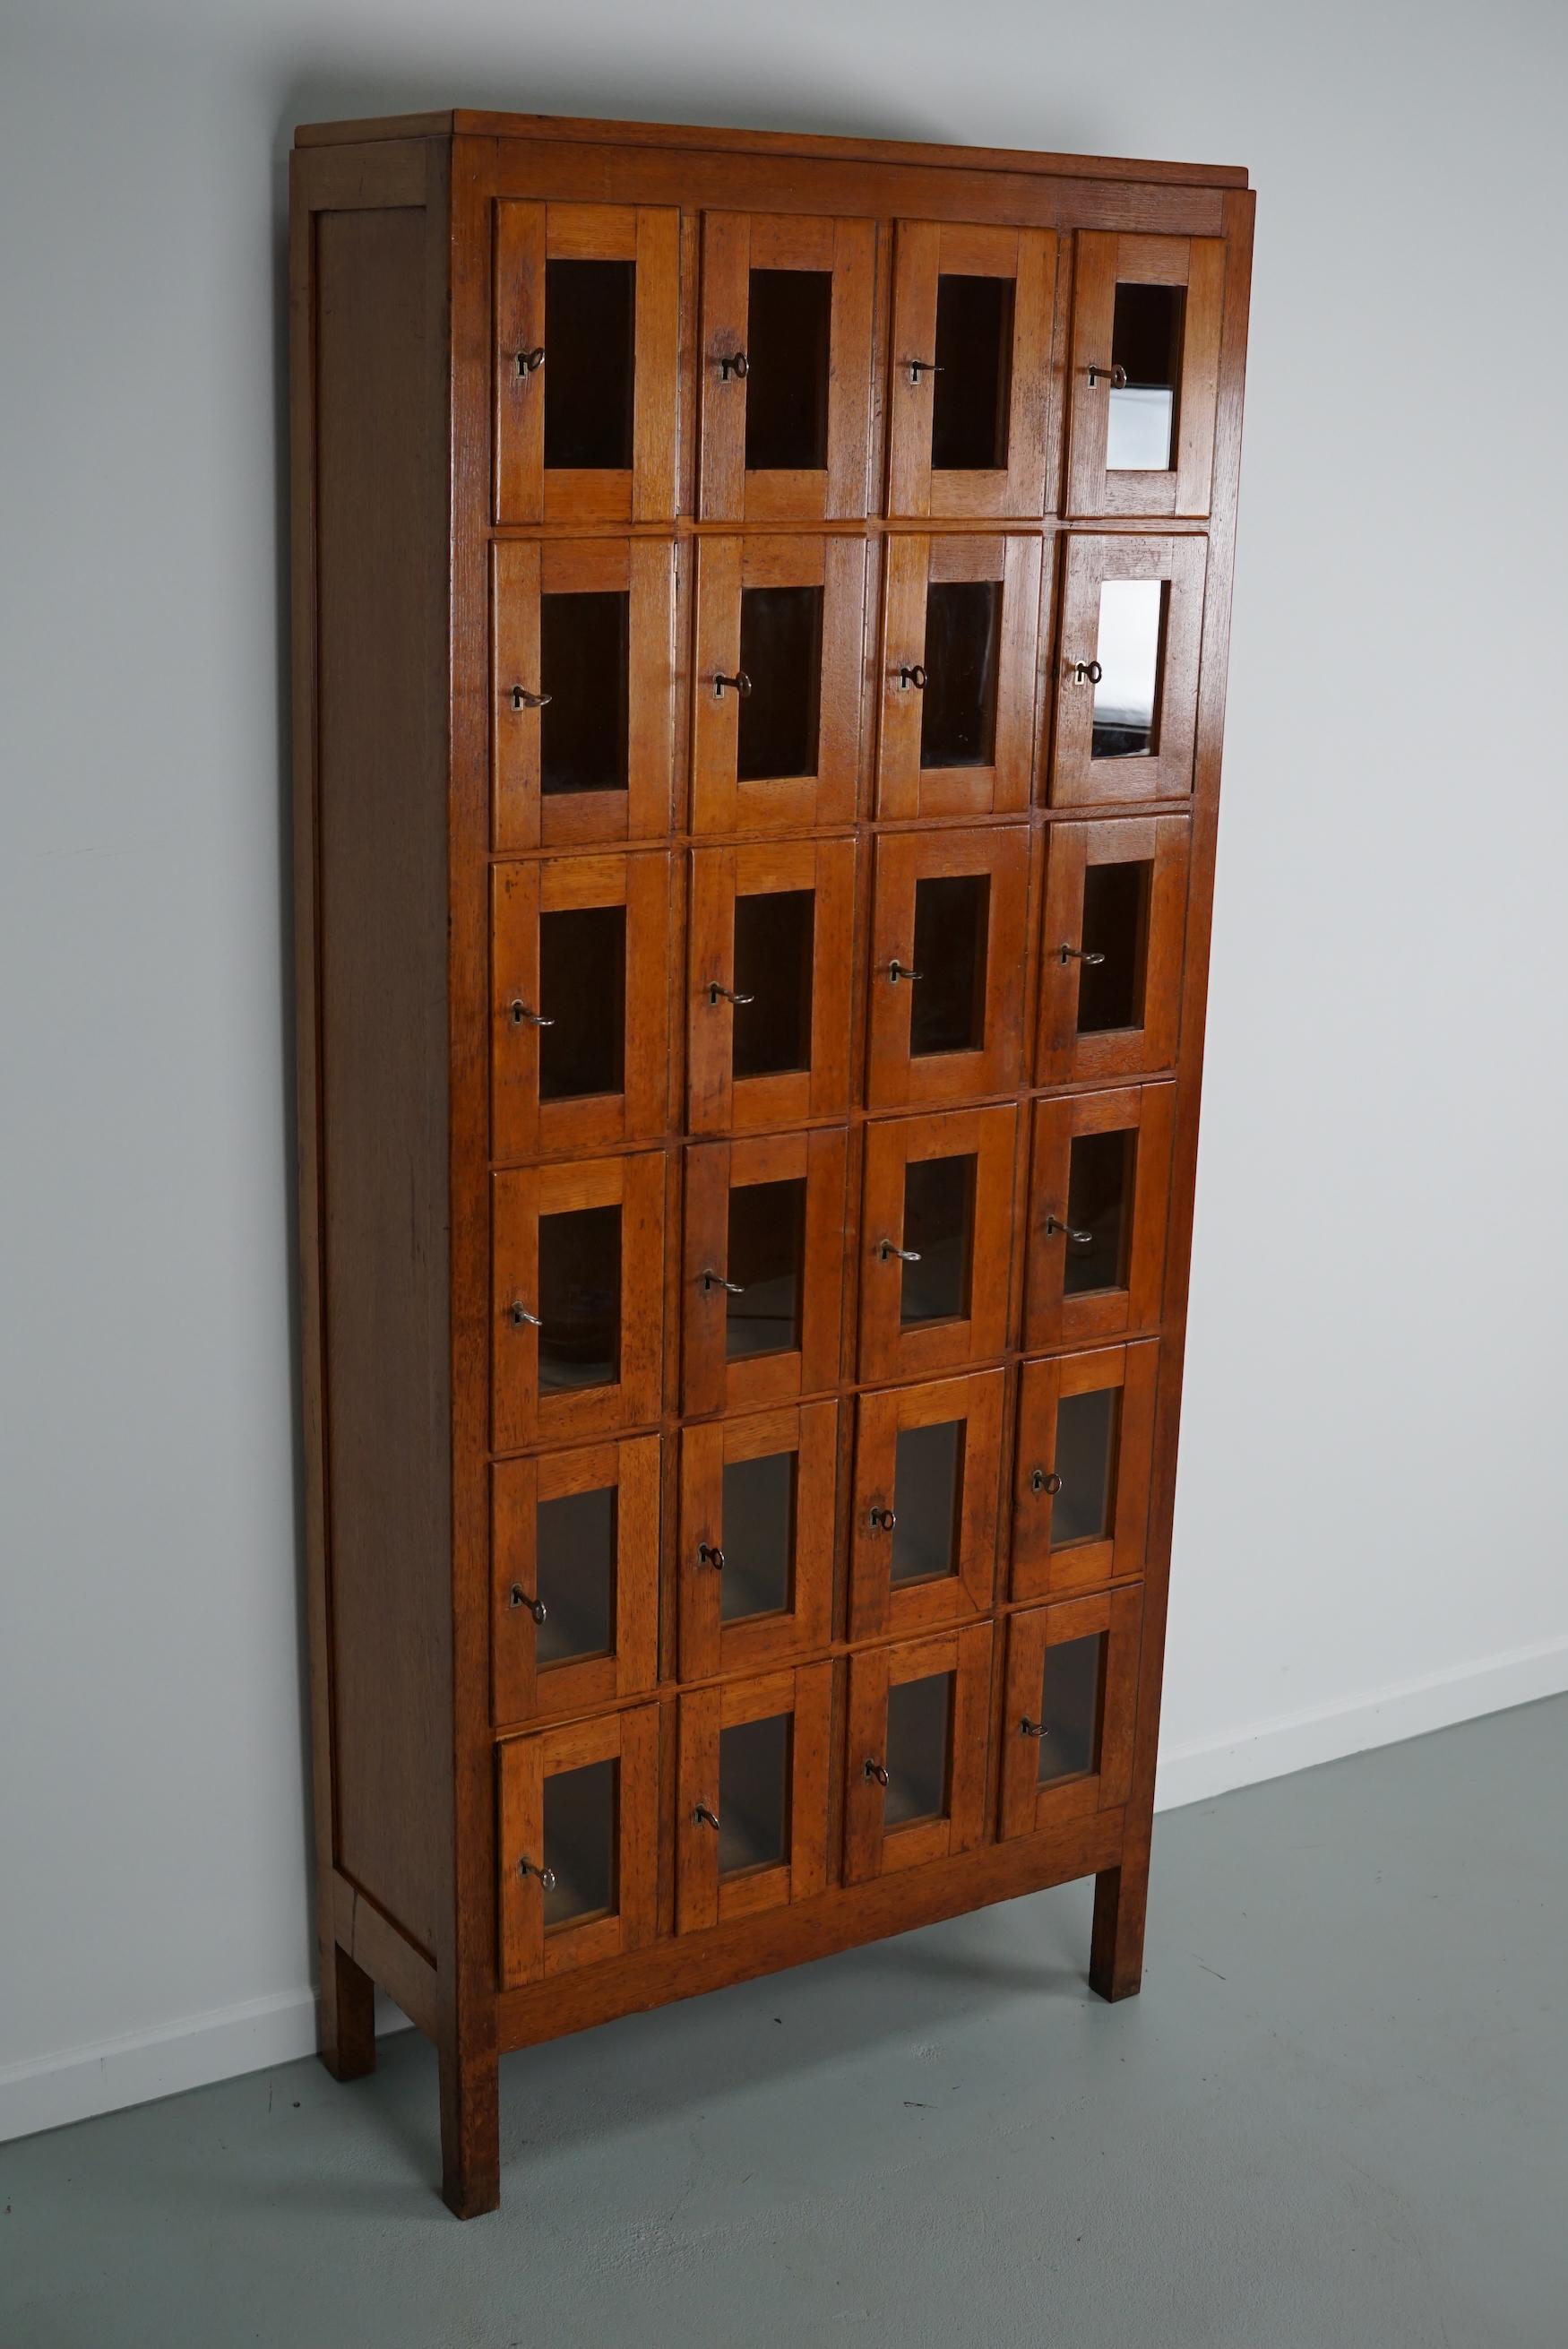 This vintage Dutch oak locker with glass doors was made around the 1930s in the Netherlands. It was used on an army base to store the headphones for the tank drivers and pilots during WW2. Every door has its own individual key. The interior